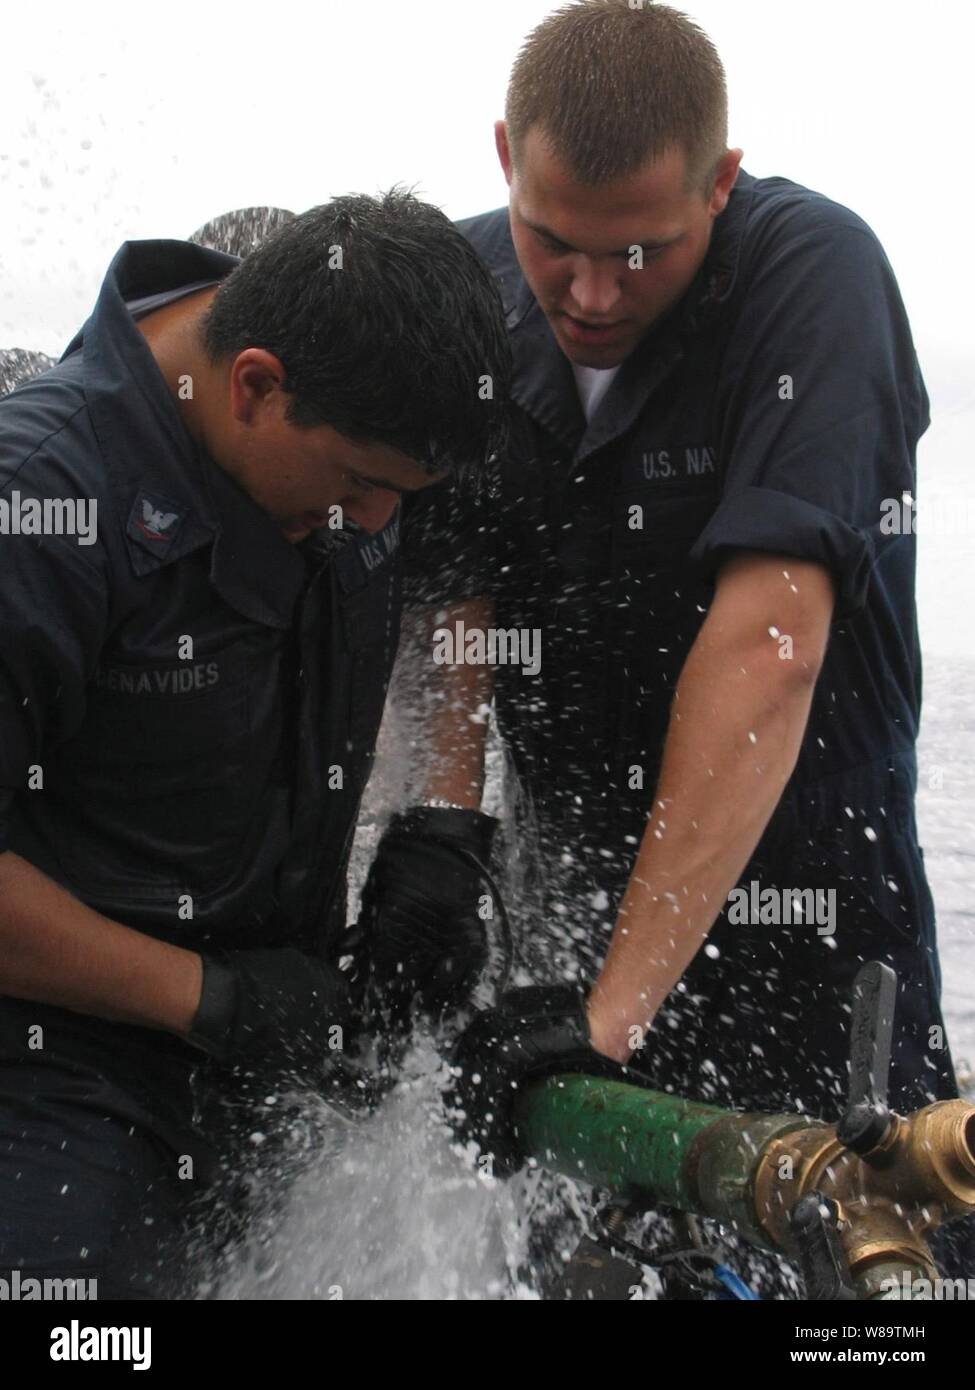 U.S. Navy Petty Officer 2nd Class Michael Murphy (right) and Petty Officer 3rd Class Joshua Benavides try to stop the leak as they compete in the pipe-patching event during the Damage Control Olympics aboard the guided-missile frigate USS Robert G. Bradley (FFG 49) on Dec. 2, 2006.  Murphy and Benavides are Navy damage controlmen.   The Bradley is deployed to the Eastern Pacific in support of counter-narcoterrorism operations. Stock Photo